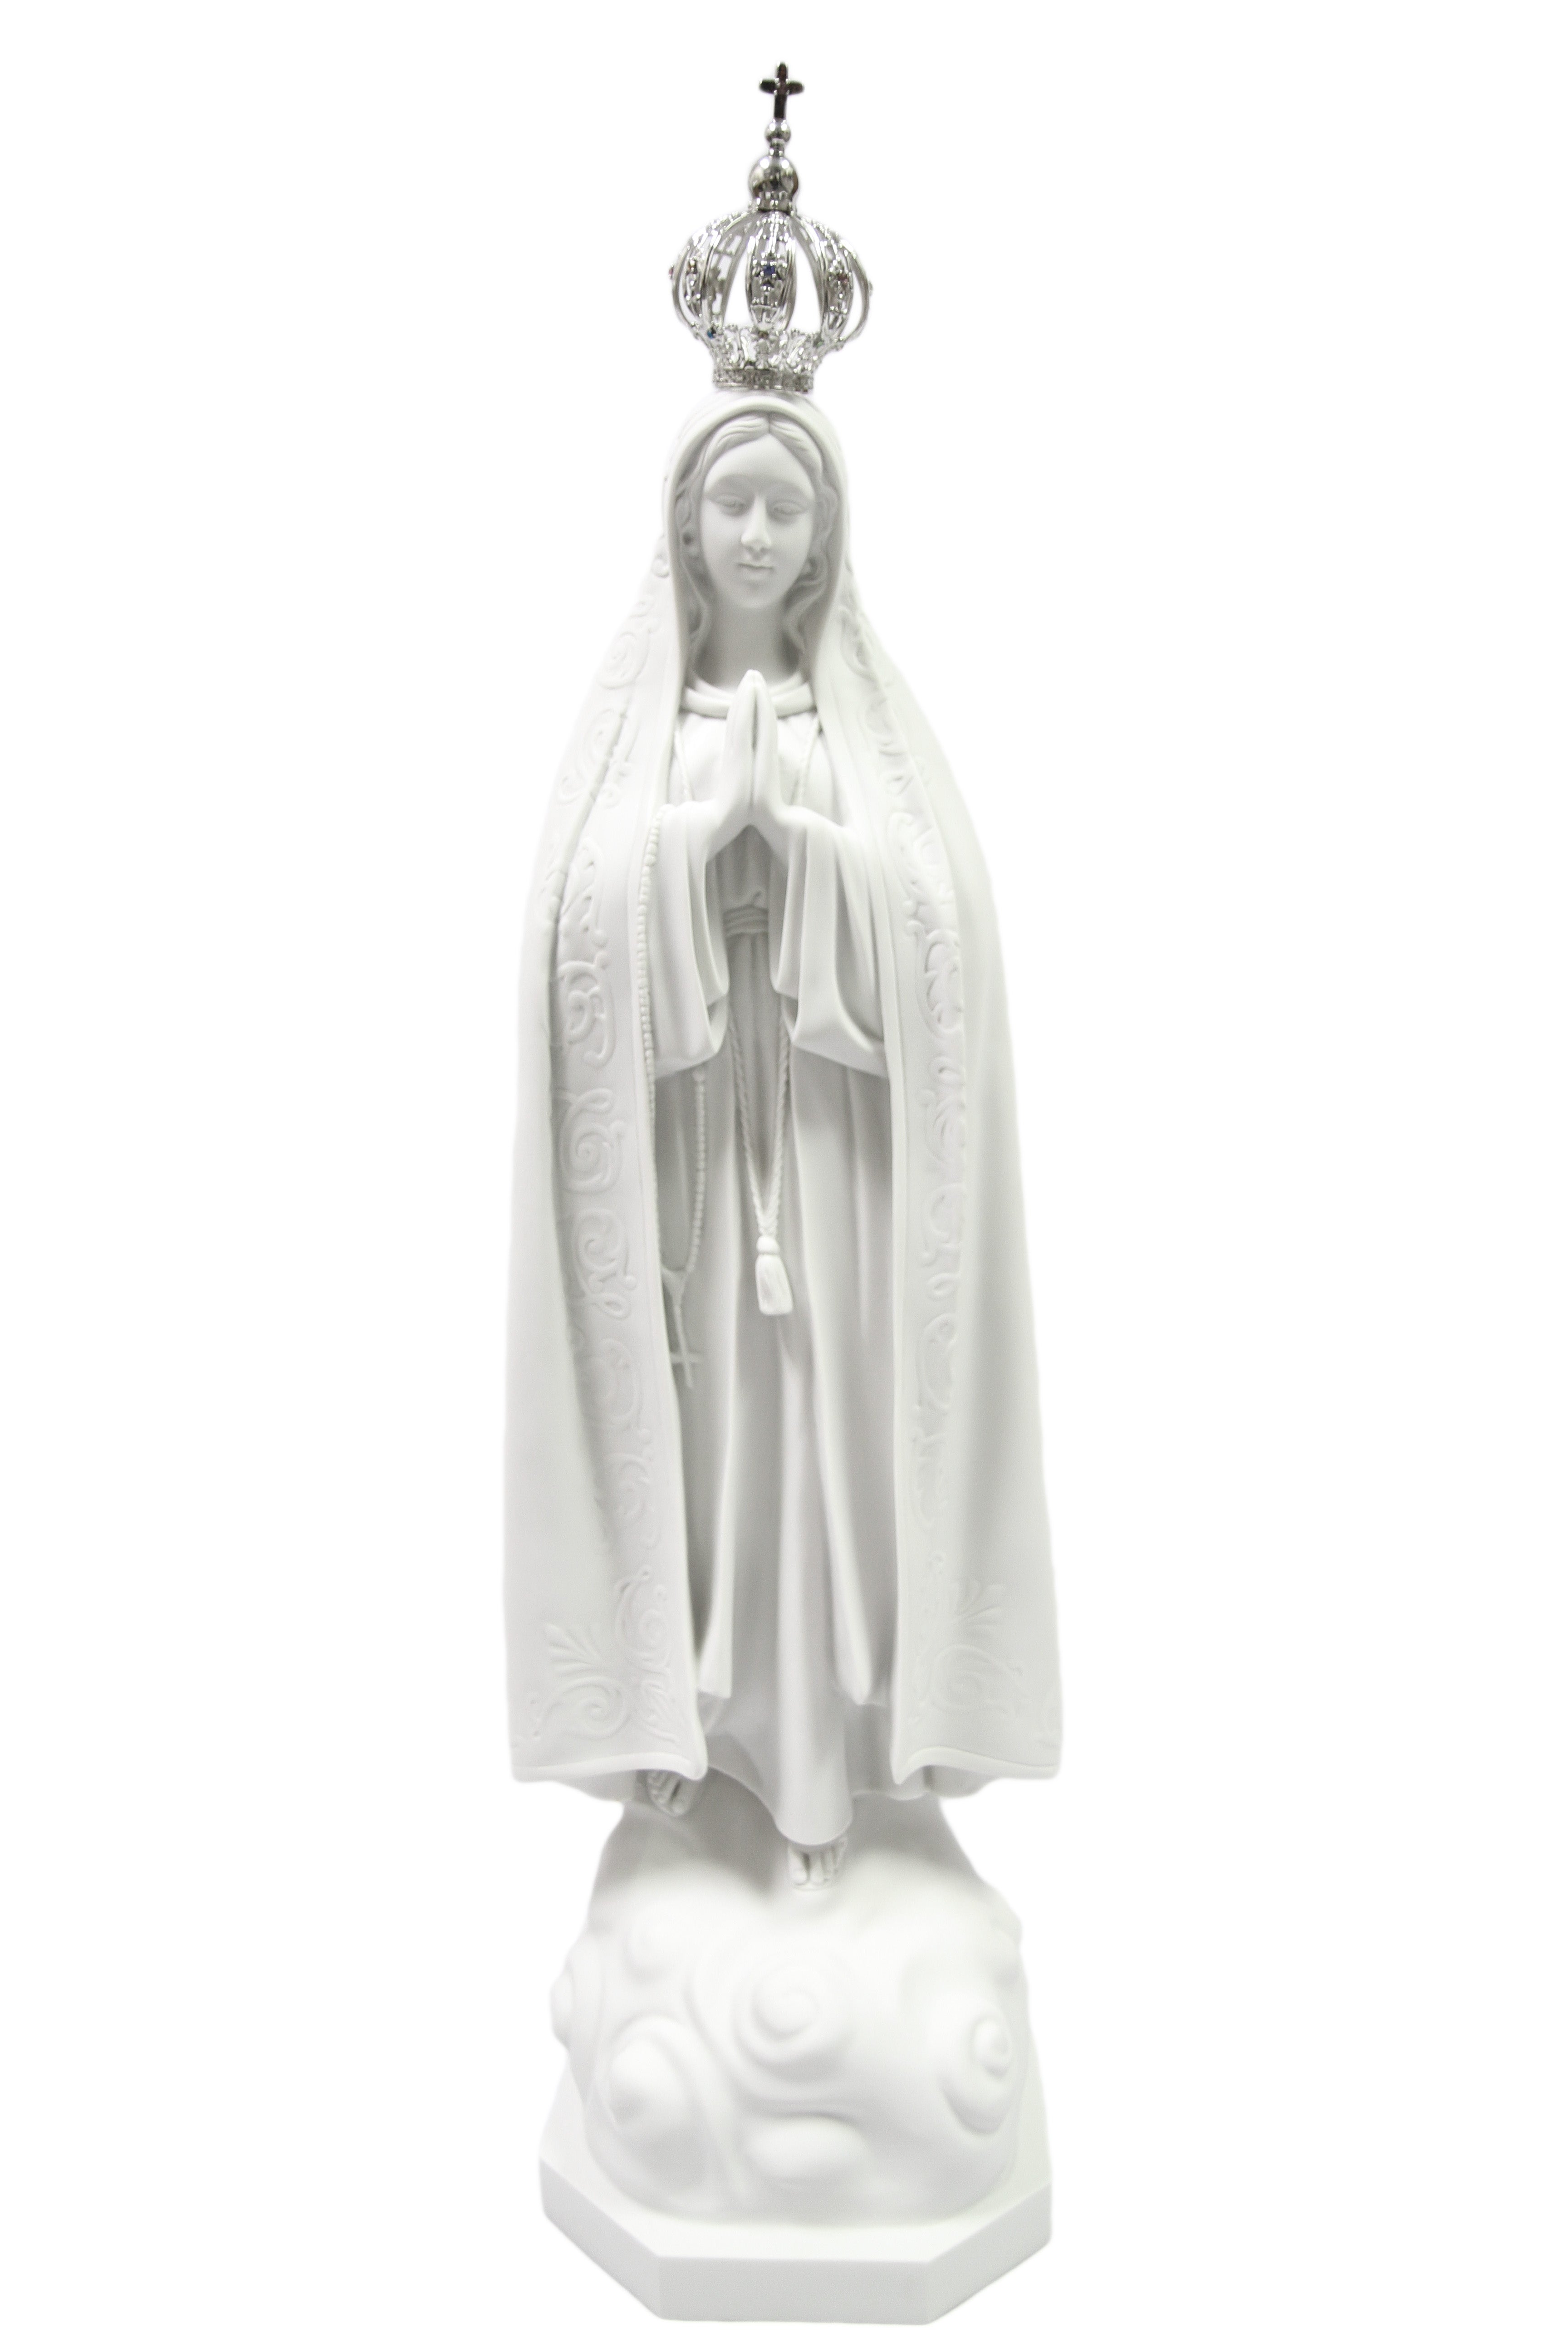 36 Inch Our Lady of Fatima with Metal Crown Catholic Statue Virgin Mary Vittoria Collection